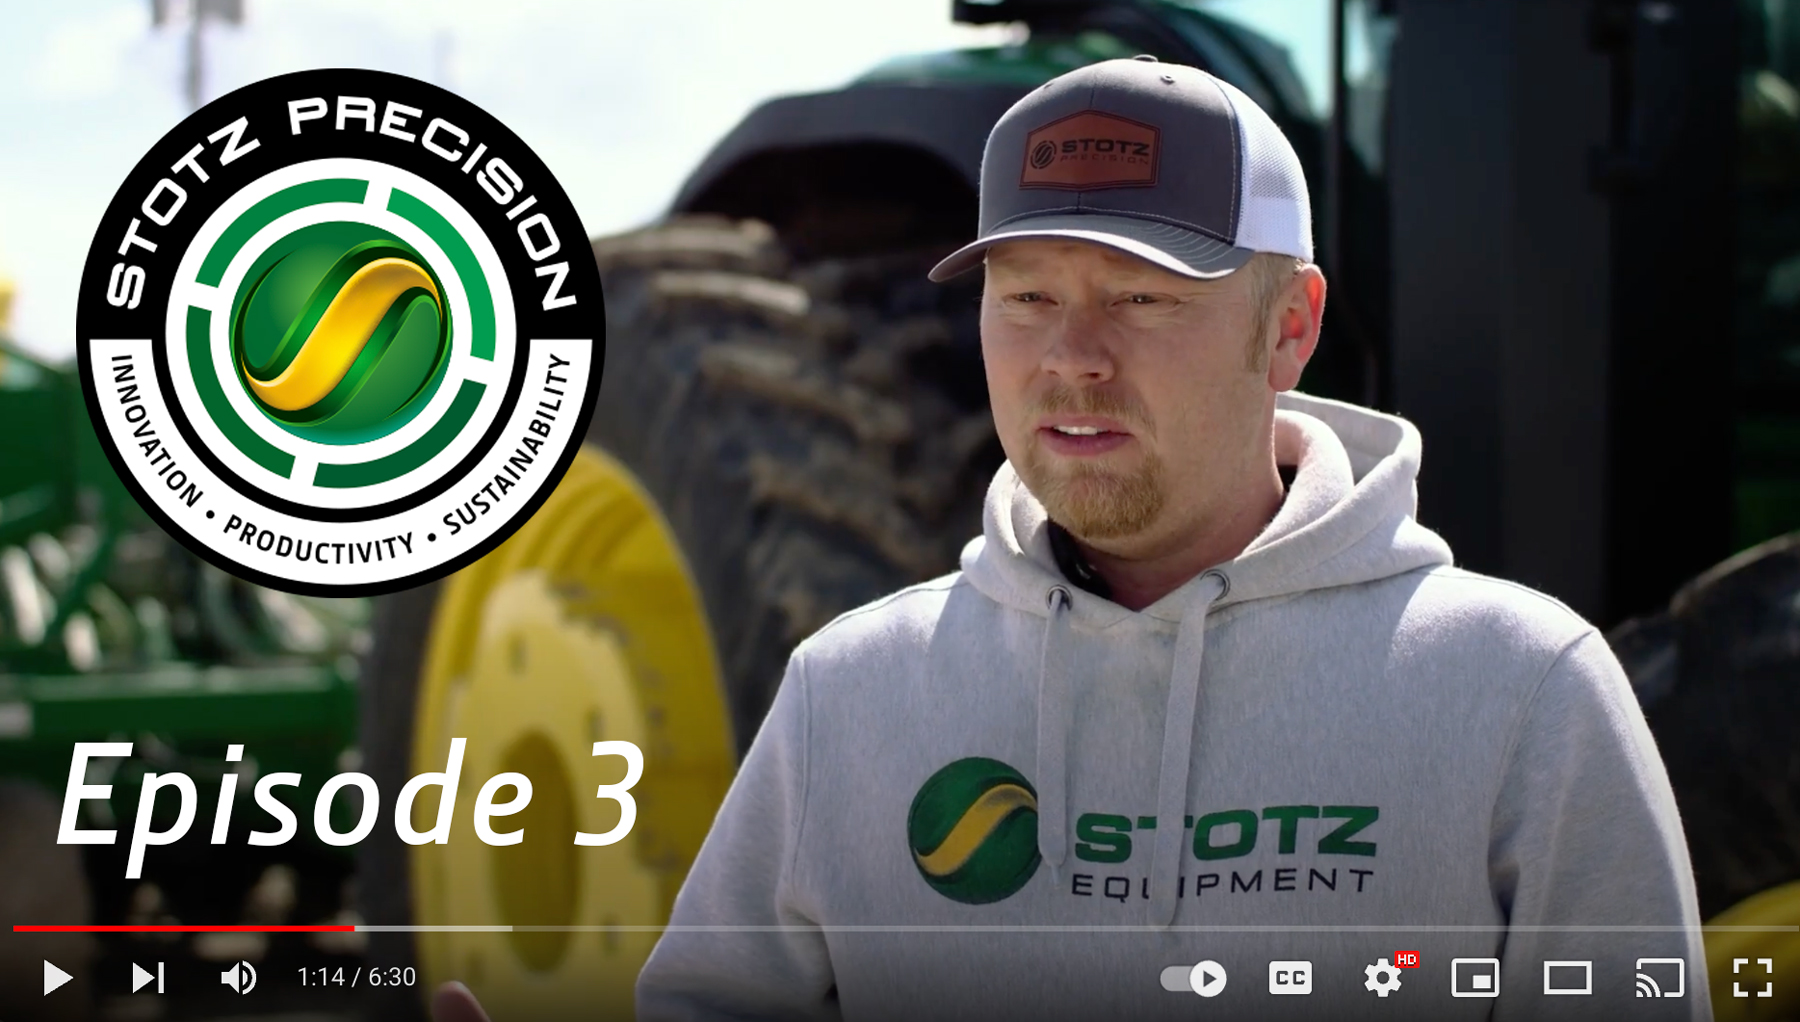 John Deere Tech at Work | Ep 3 - Getting Ready for Go Time